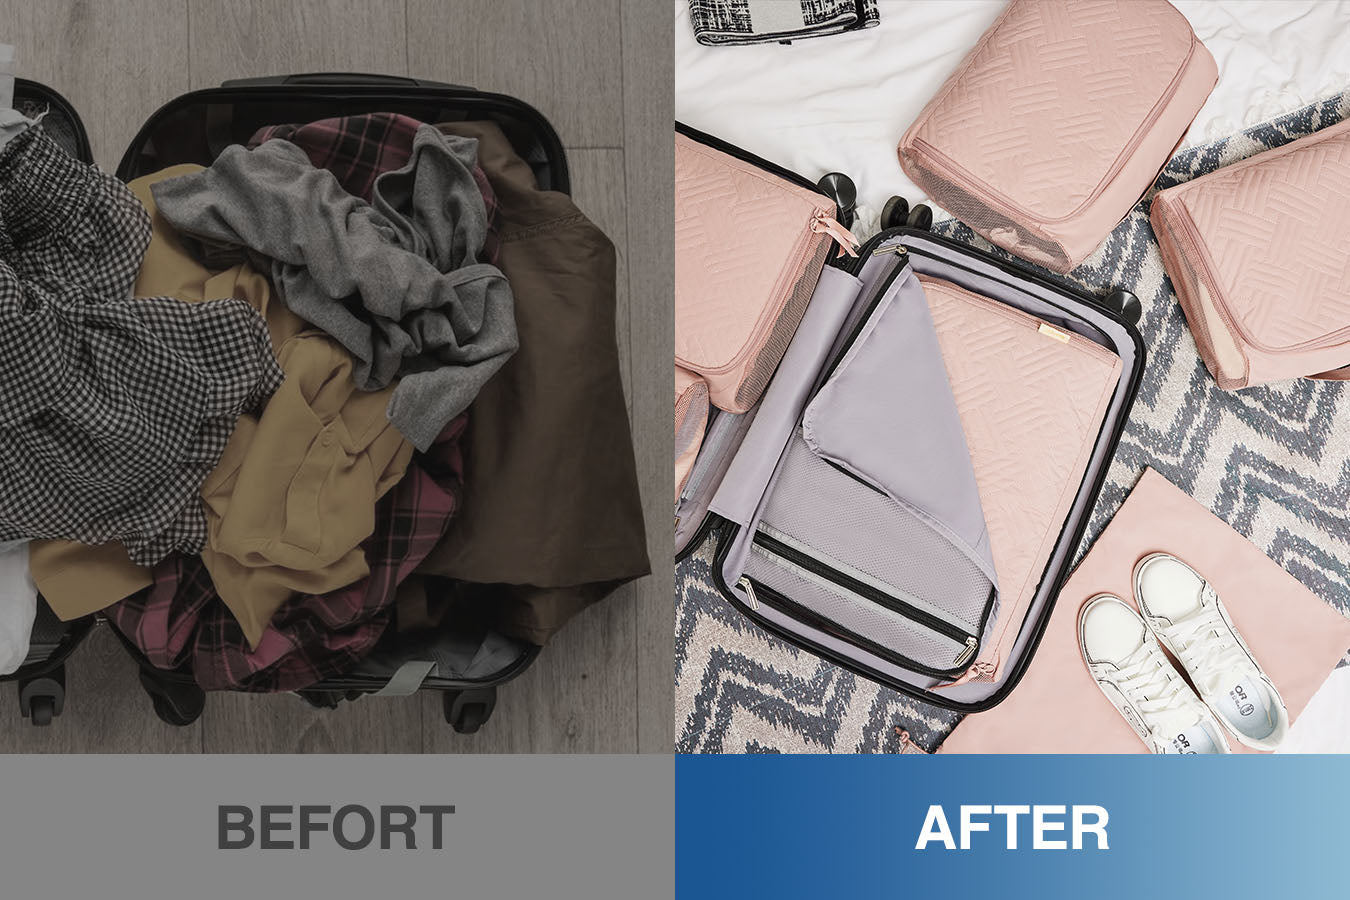 Transform chaotic travel packing into an efficient ritual with the help of compression packing cubes.